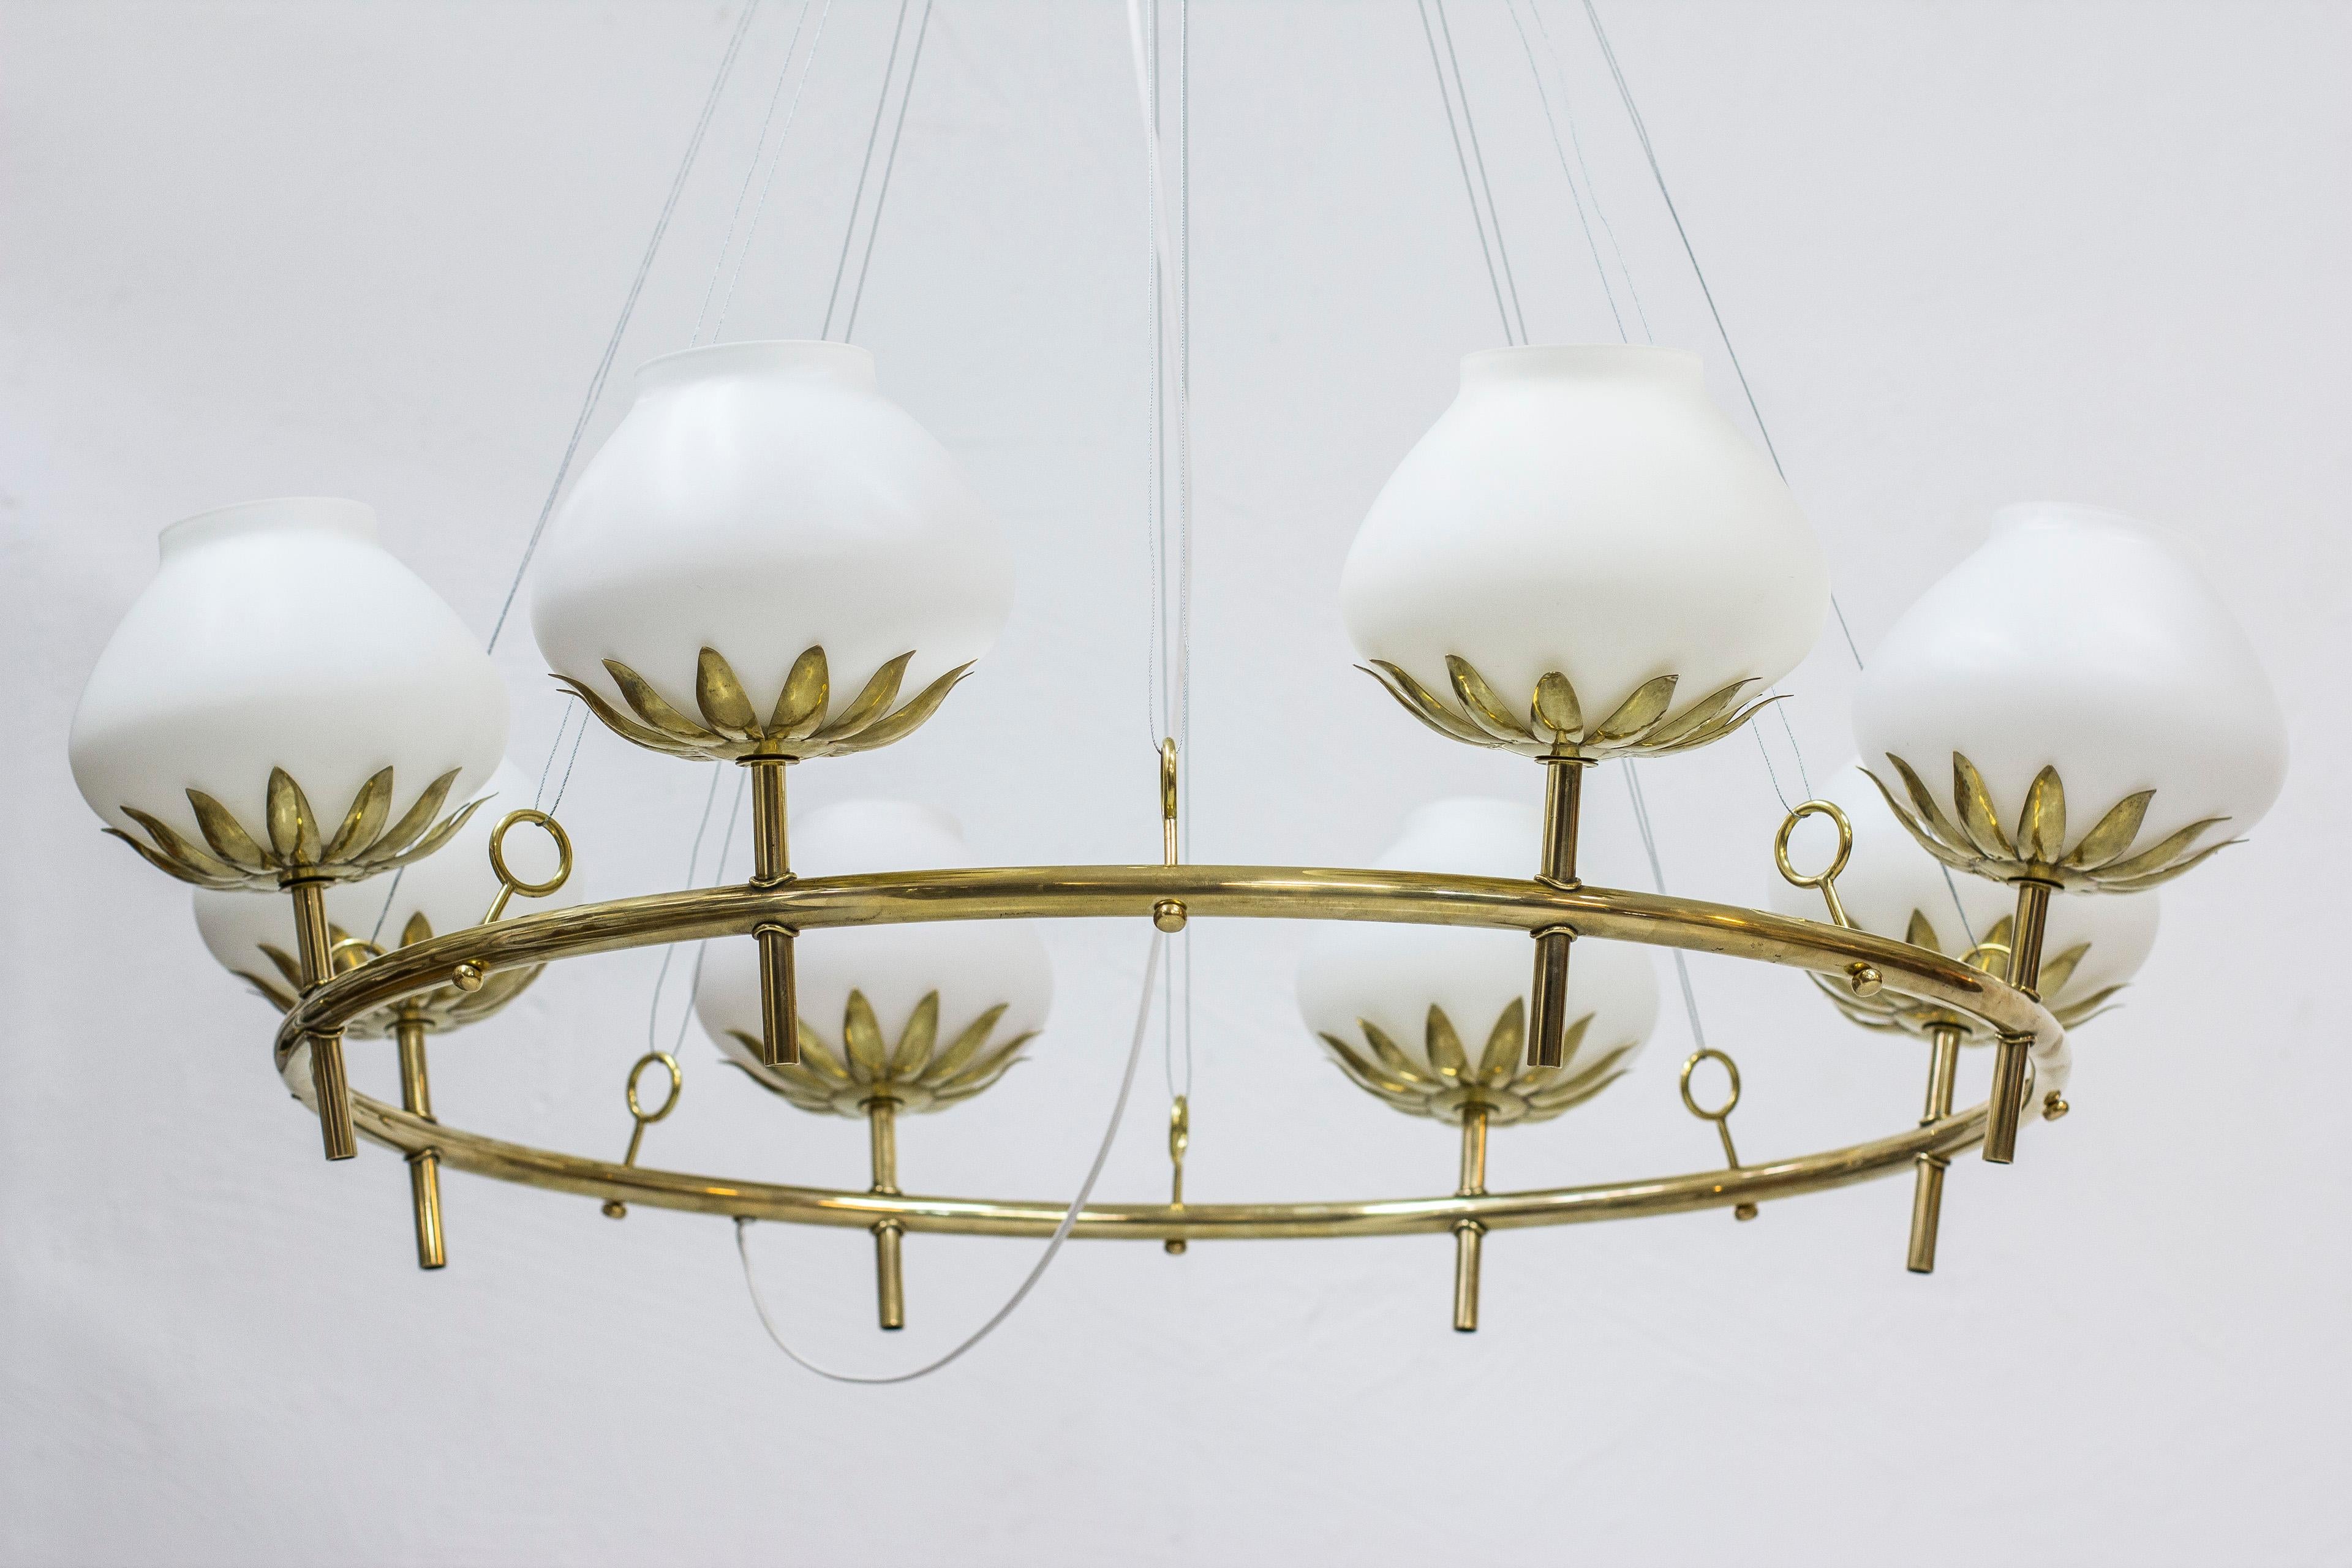 Rare chandelier designed by Hans Bergström. Produced by Ateljé Lyktan during the 1940s. Made from solid polished brass with eight light fixtures with opaline glass shades. Ceiling mount with wire suspension. Very good vintage condition with light